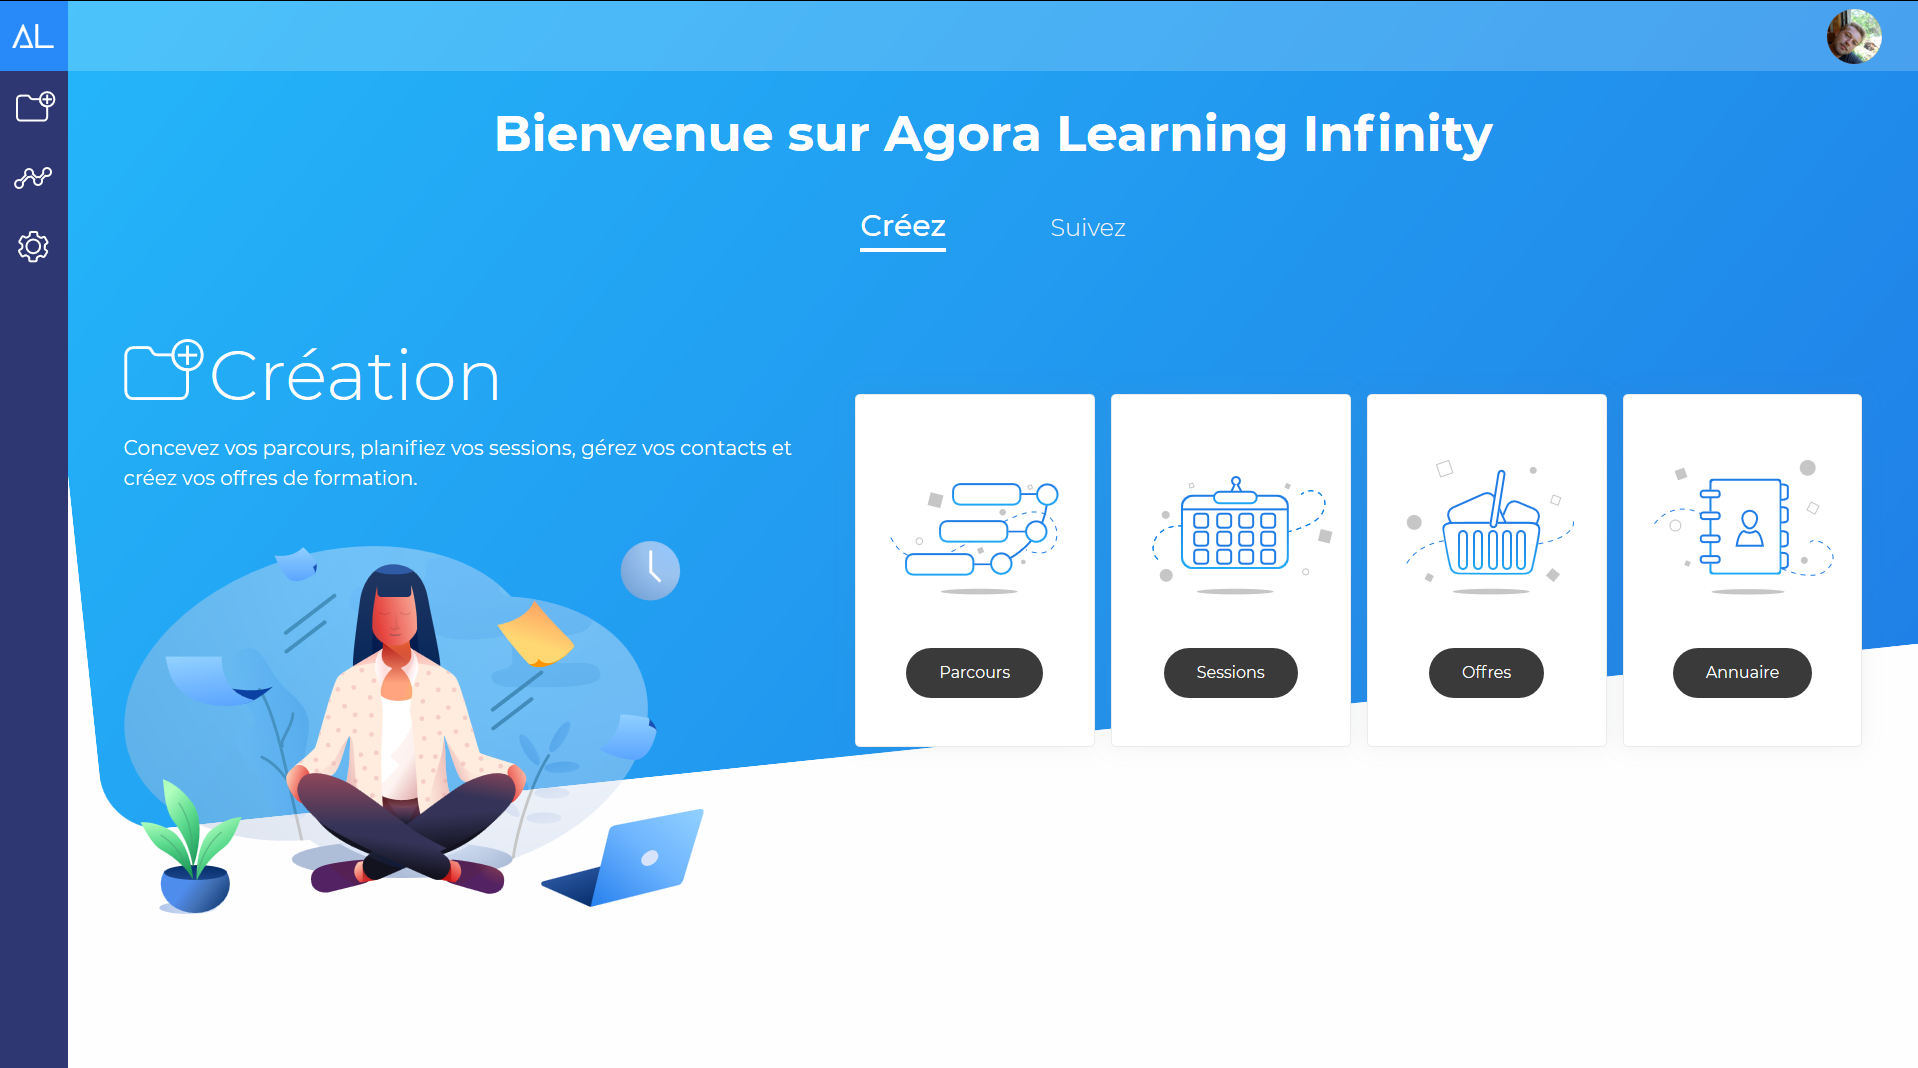 AGORA LEARNING INFINITY